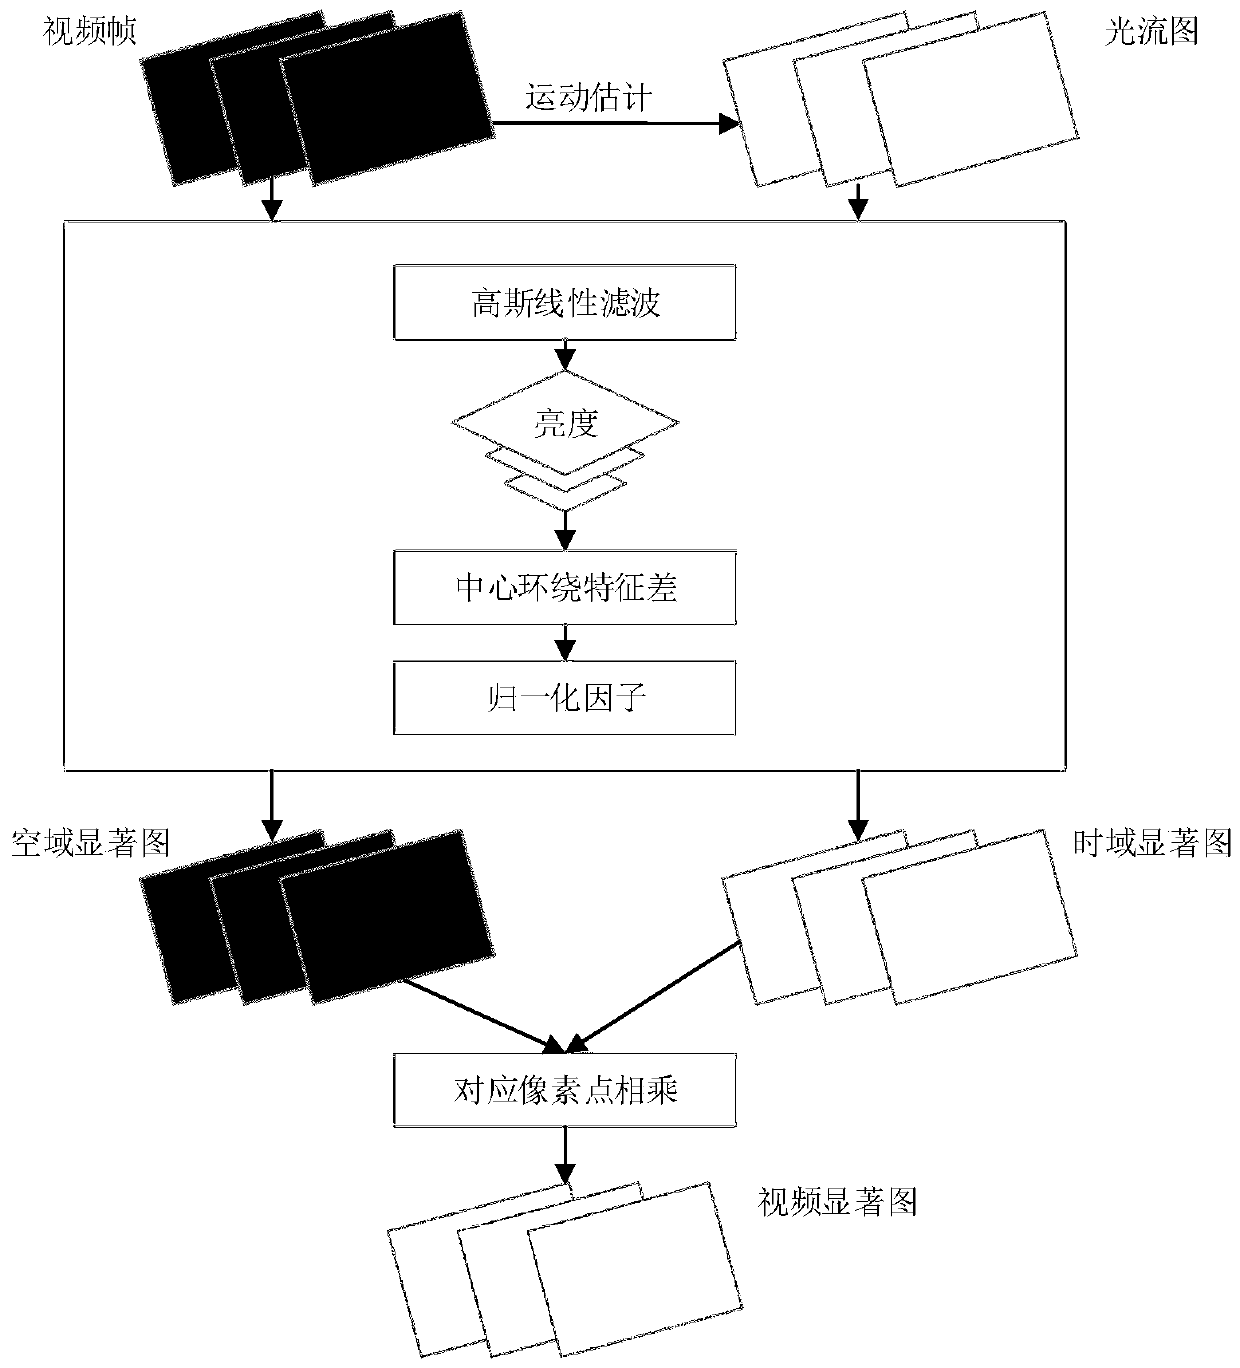 Dynamic video tactile feature extraction and rendering method